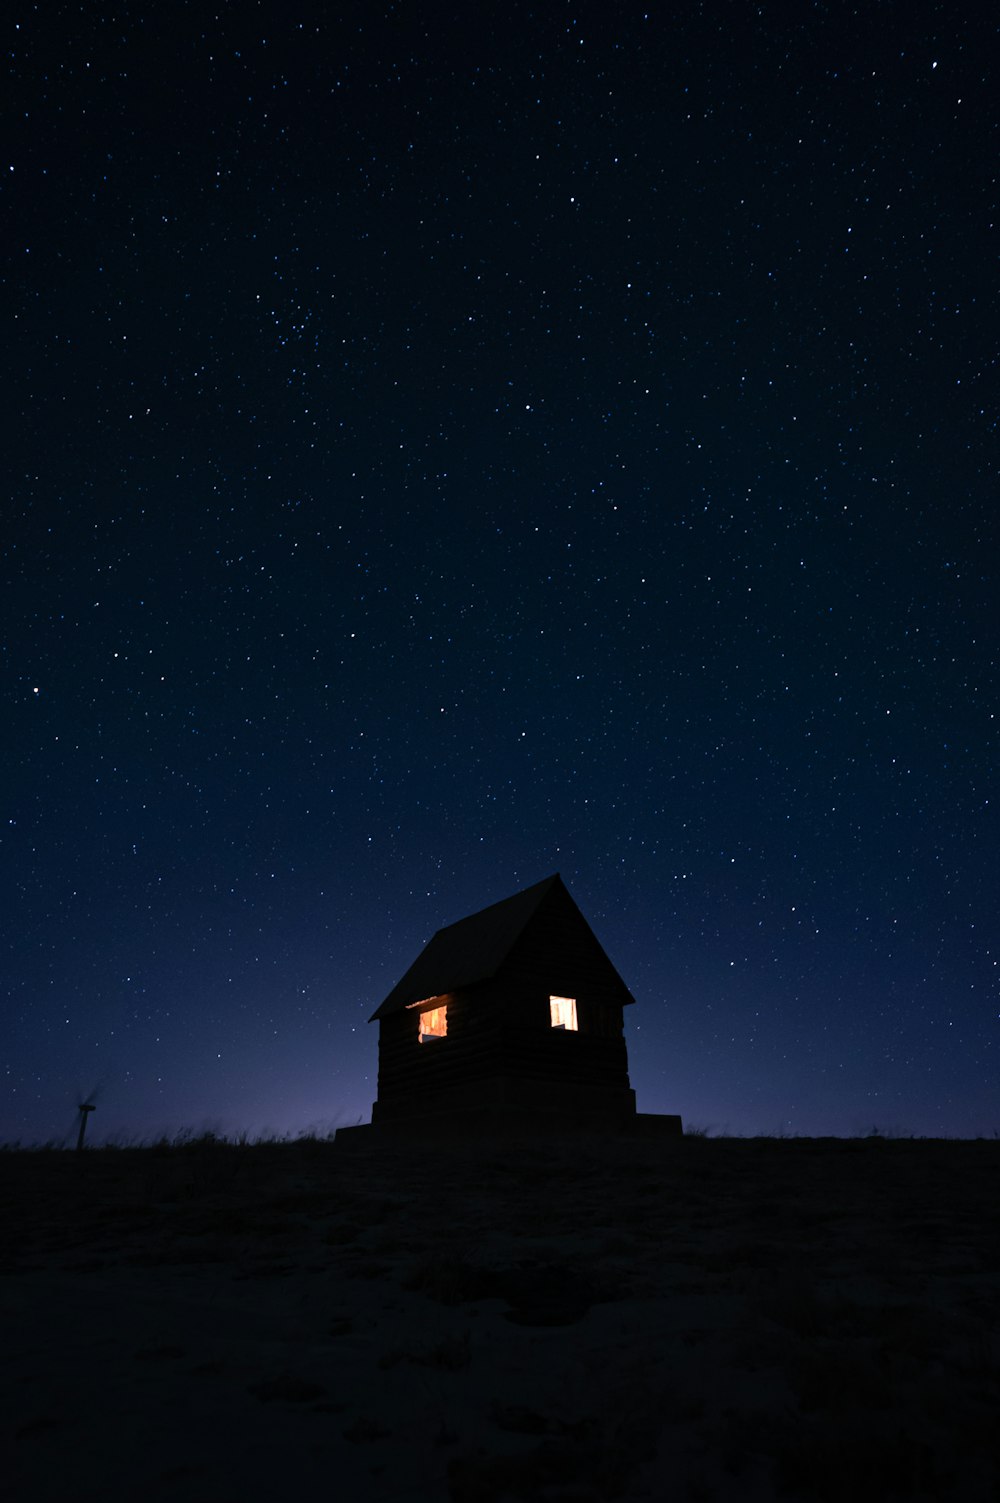 a small cabin sitting in the middle of a field under a night sky